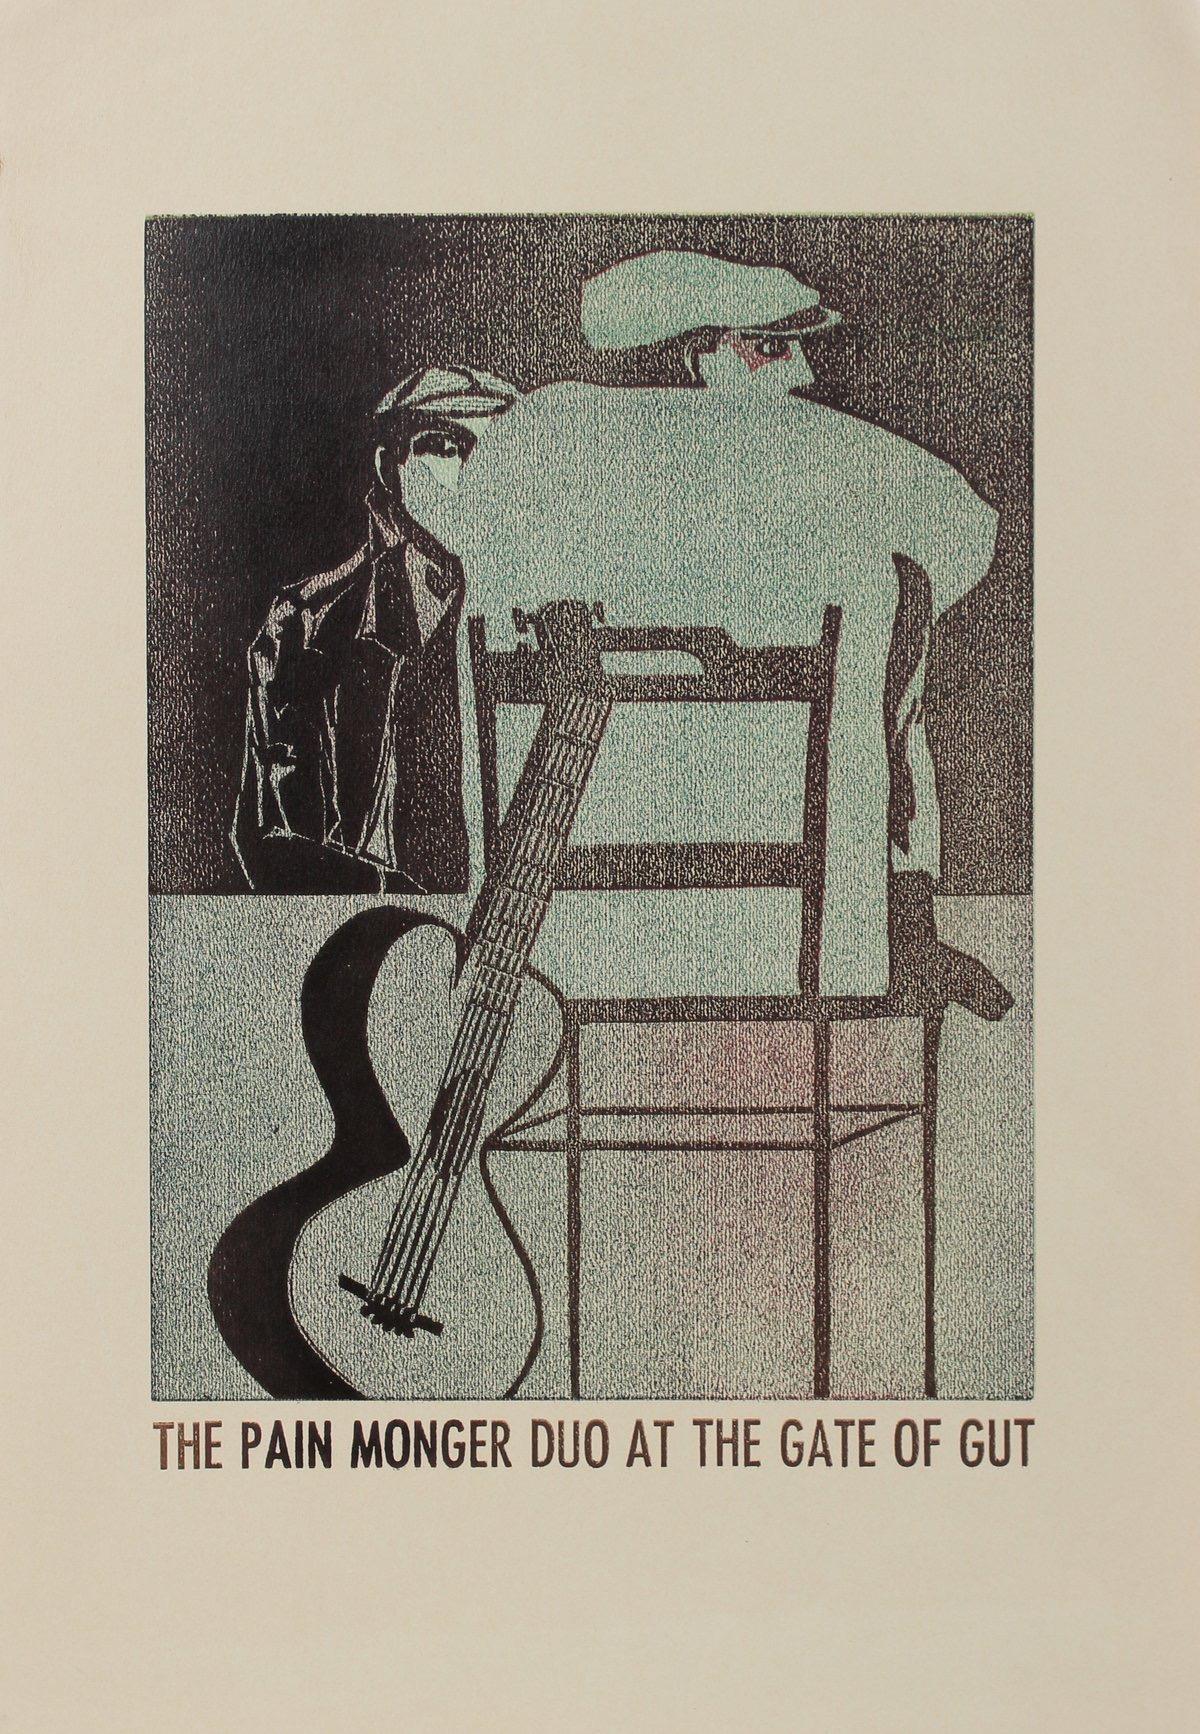 "The Pain Monger Duo at the Gate of Gut" 1960-70s Serigraph